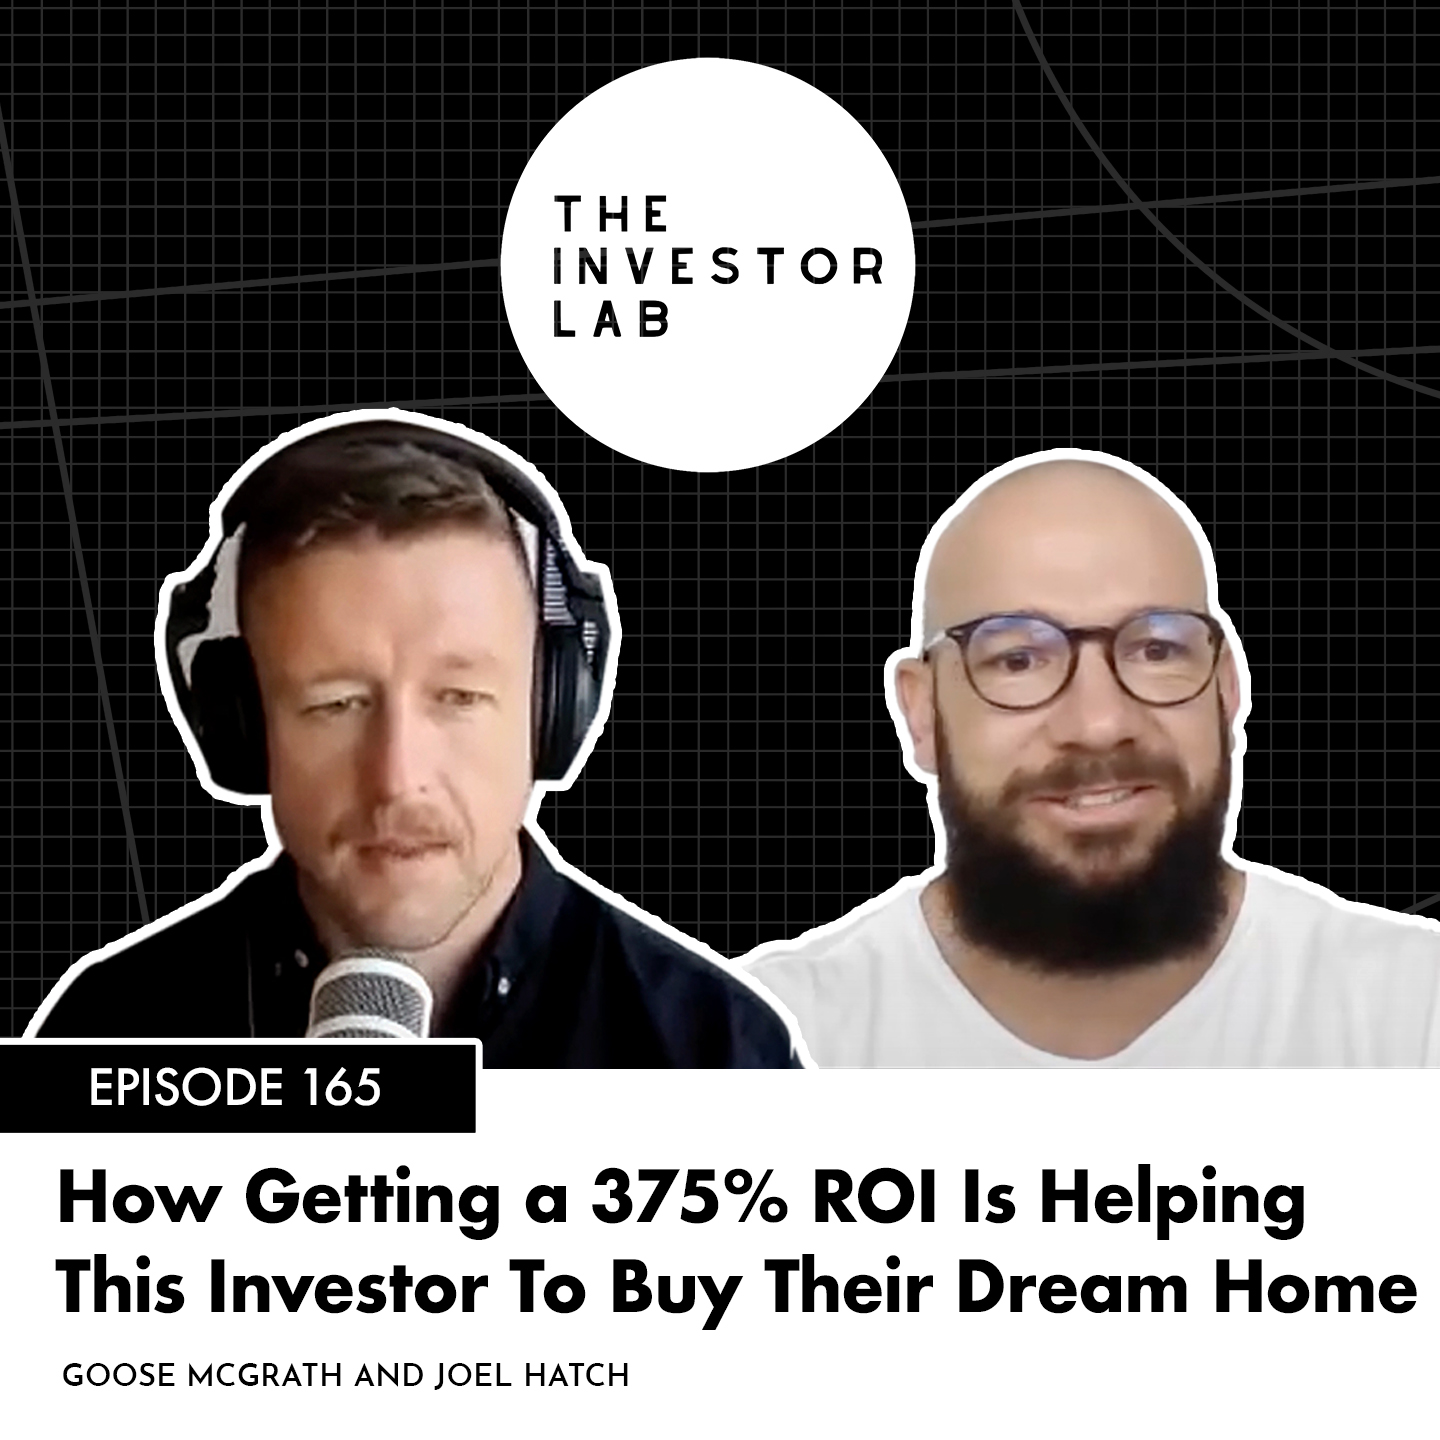 How Getting a 375% ROI is Helping This Investor to Buy Their Dream Home with Joel Hatch